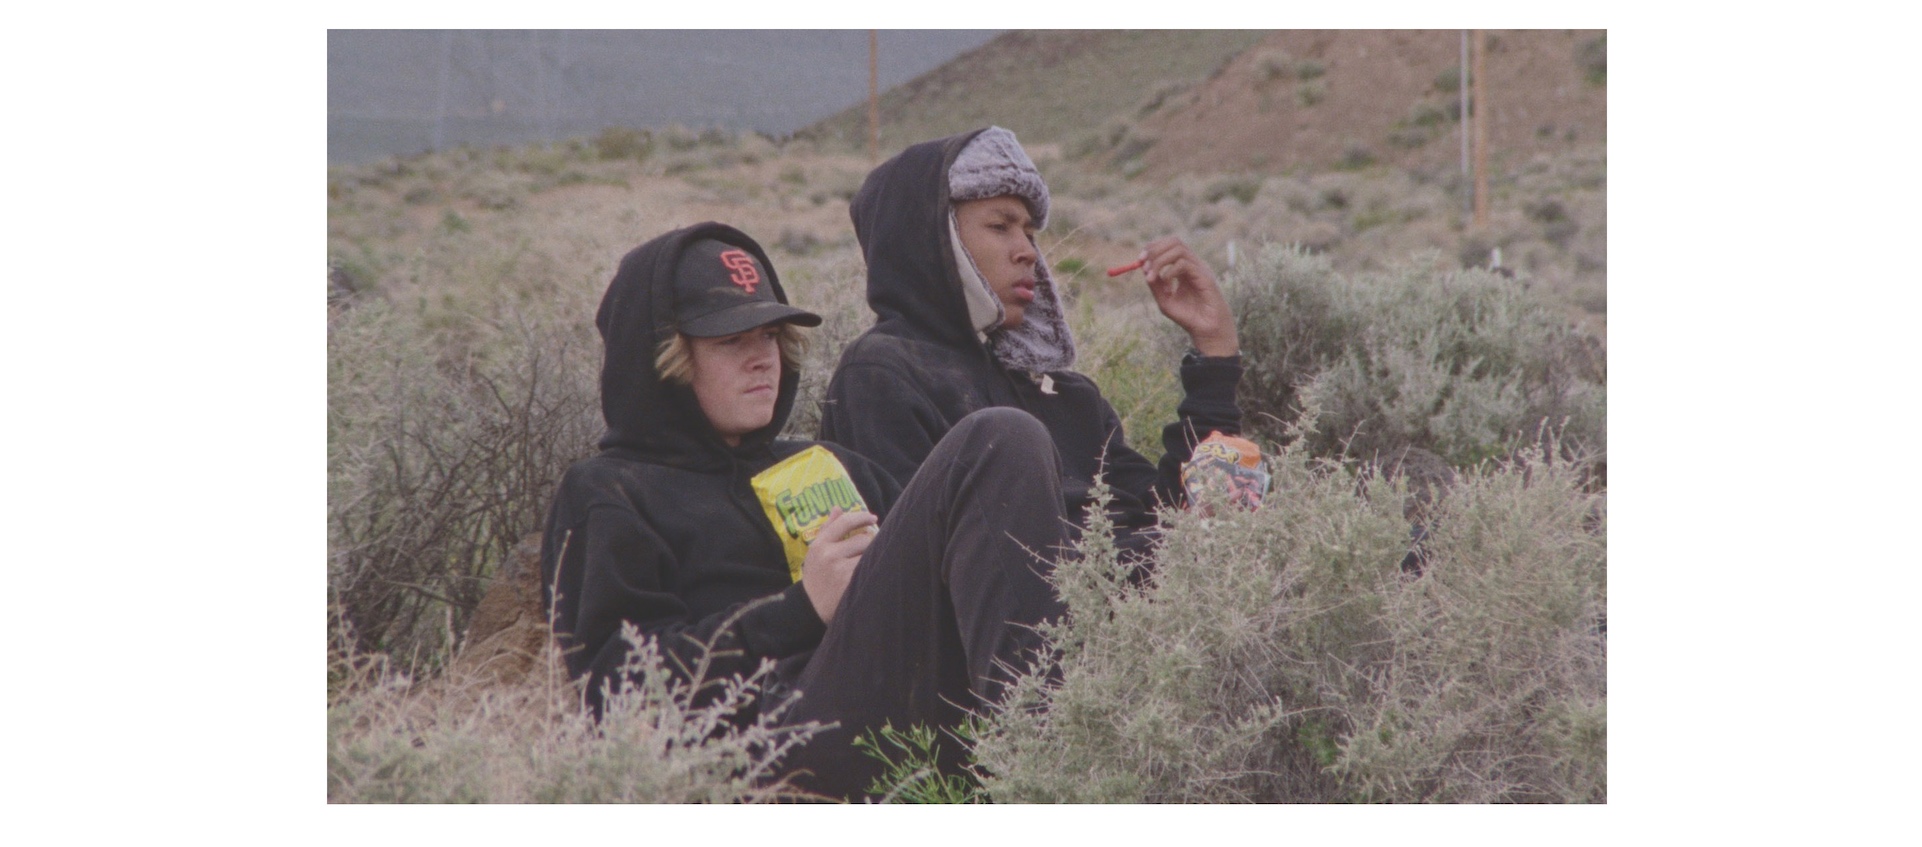 Two teenage boys in hats and coats sit in the California wilderness eating snack food in a scene from Stanya Kahn's 2020 short film No Go Backs